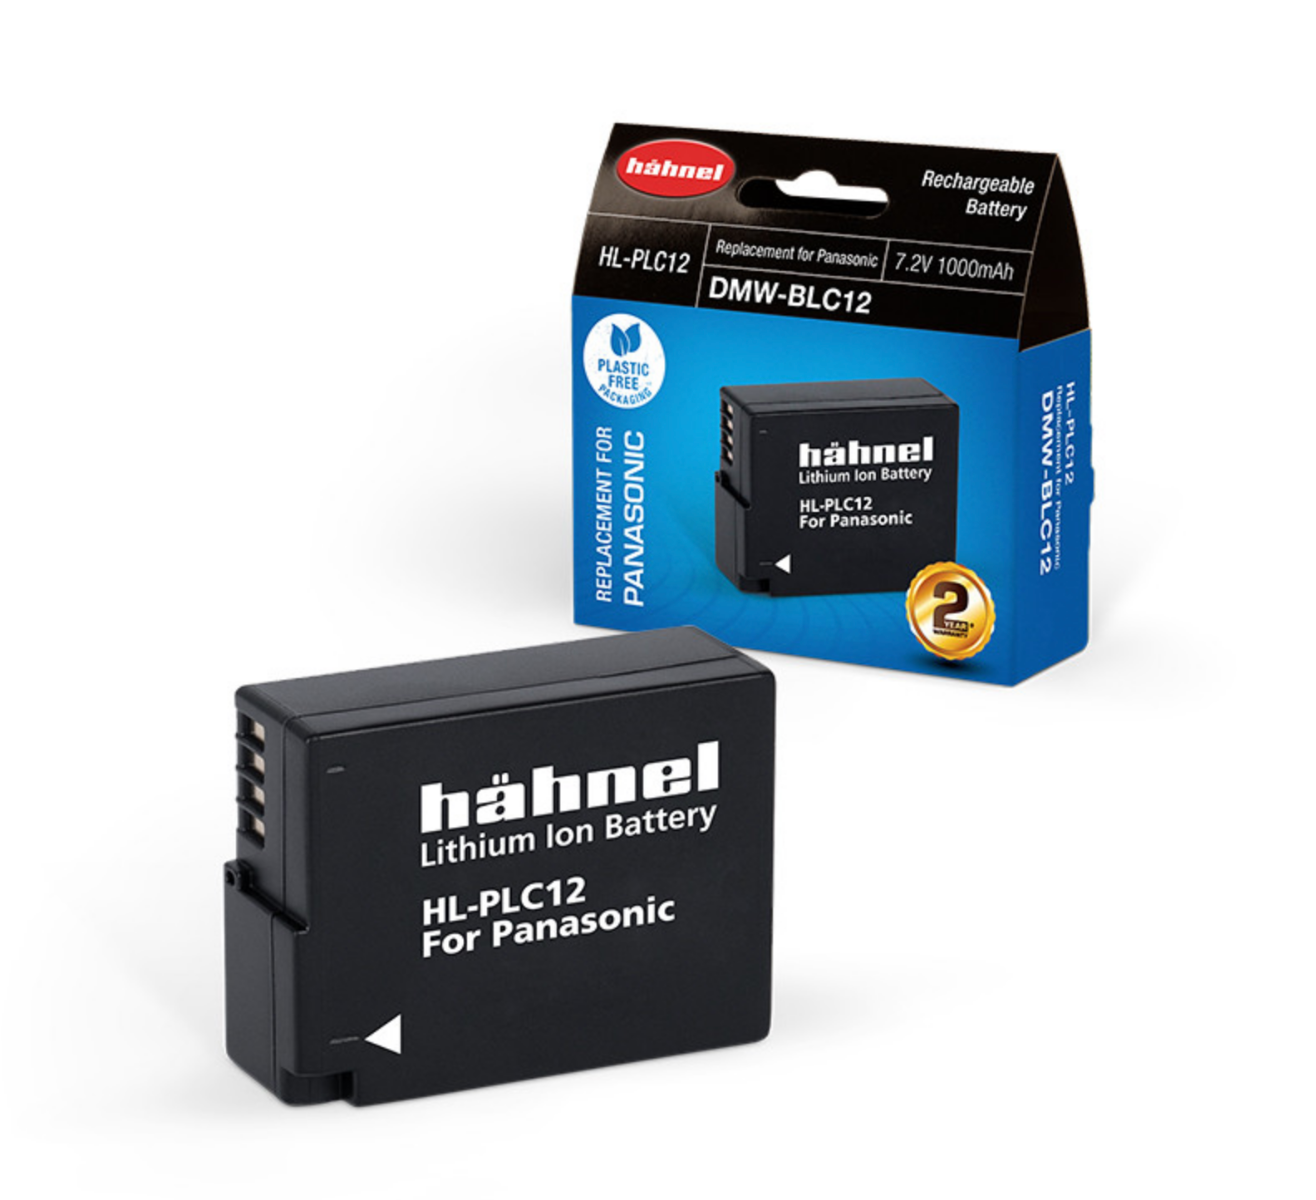 Product Image of Hahnel HL-PLC12 Li ion Replacement Battery for Panasonic DMW-BLC12